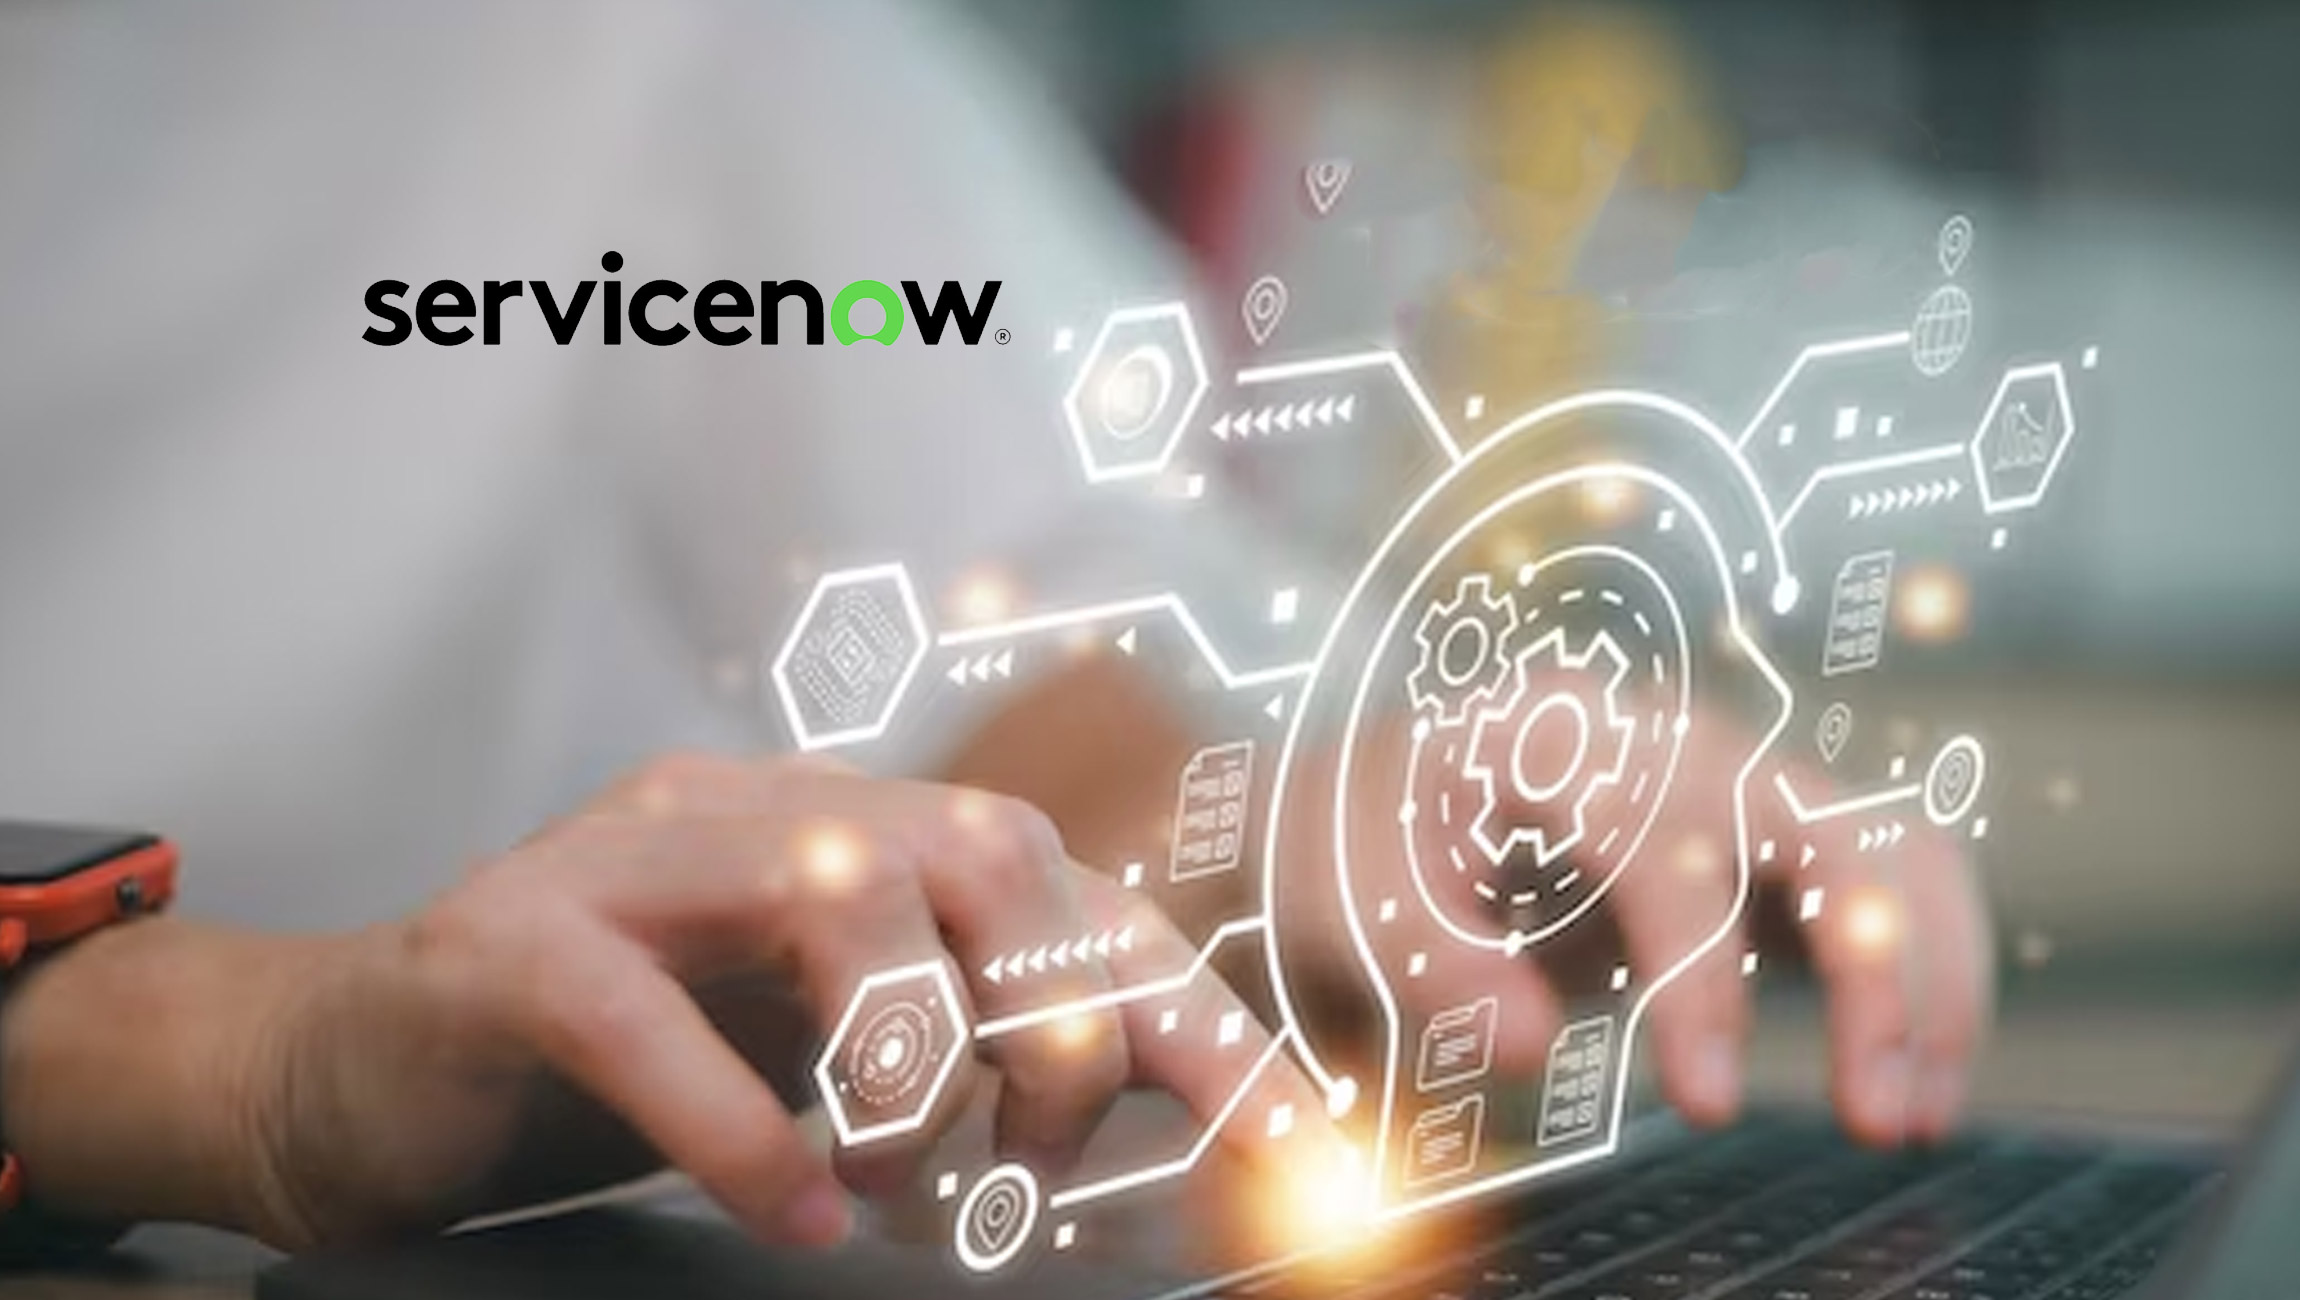 ServiceNow Introduces New Generative AI Solution, Now Assist for Virtual Agent, to Create Conversational Experiences for More Intelligent Self-Service